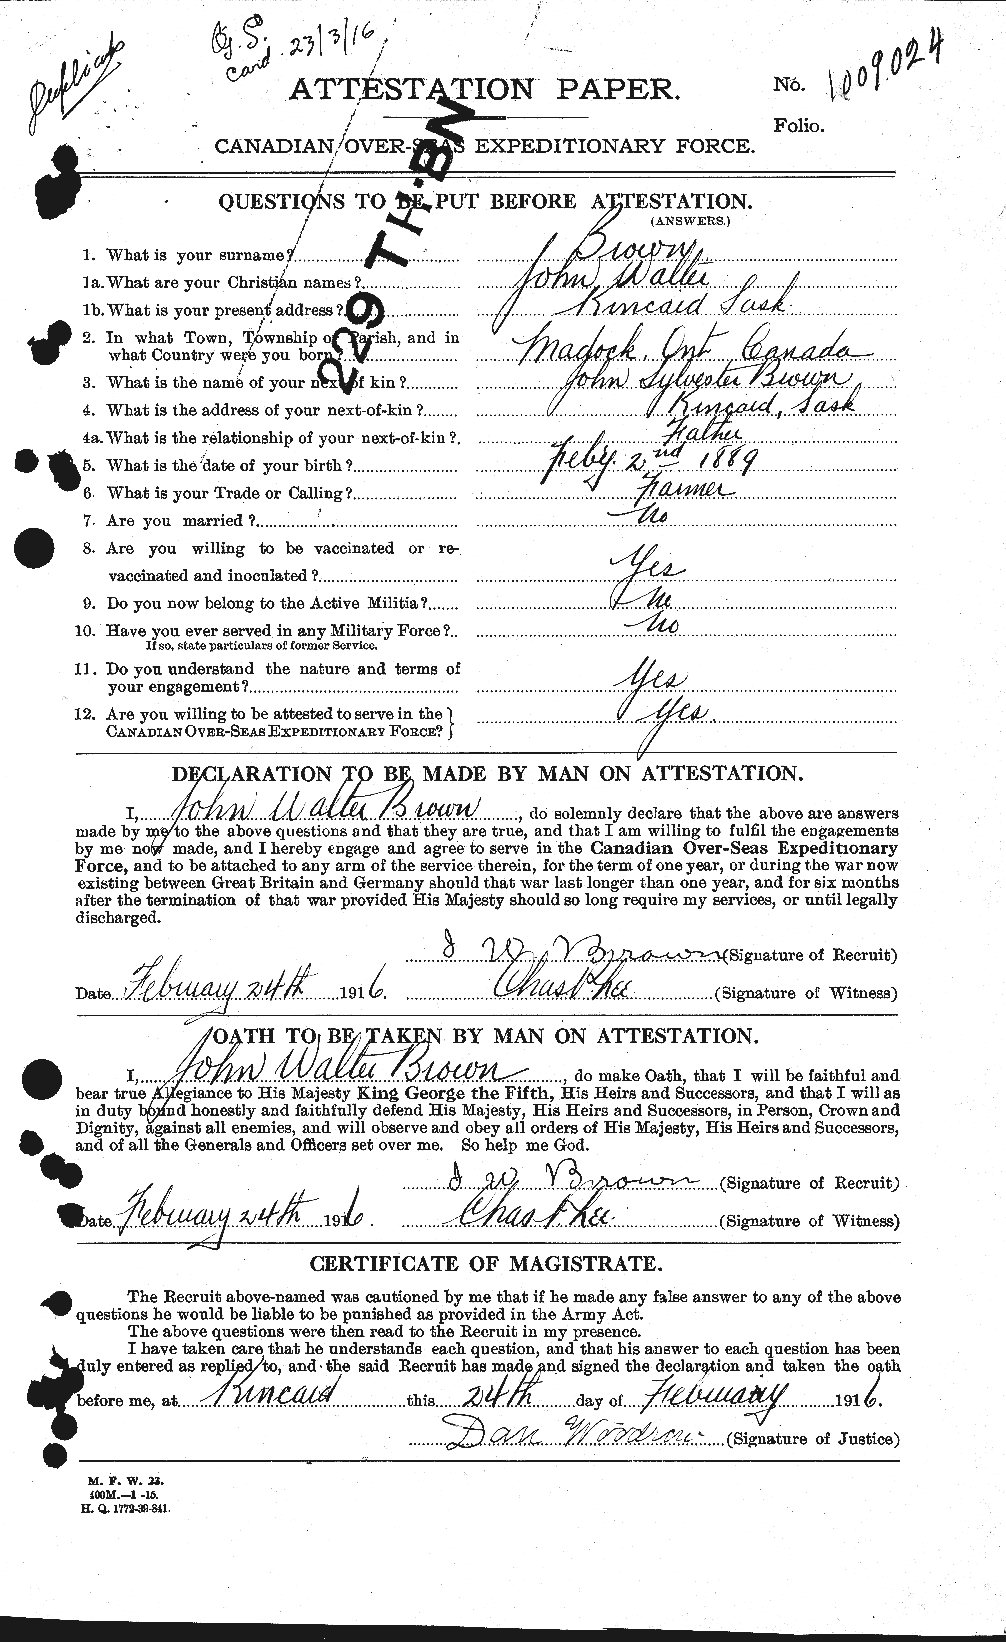 Personnel Records of the First World War - CEF 265896a